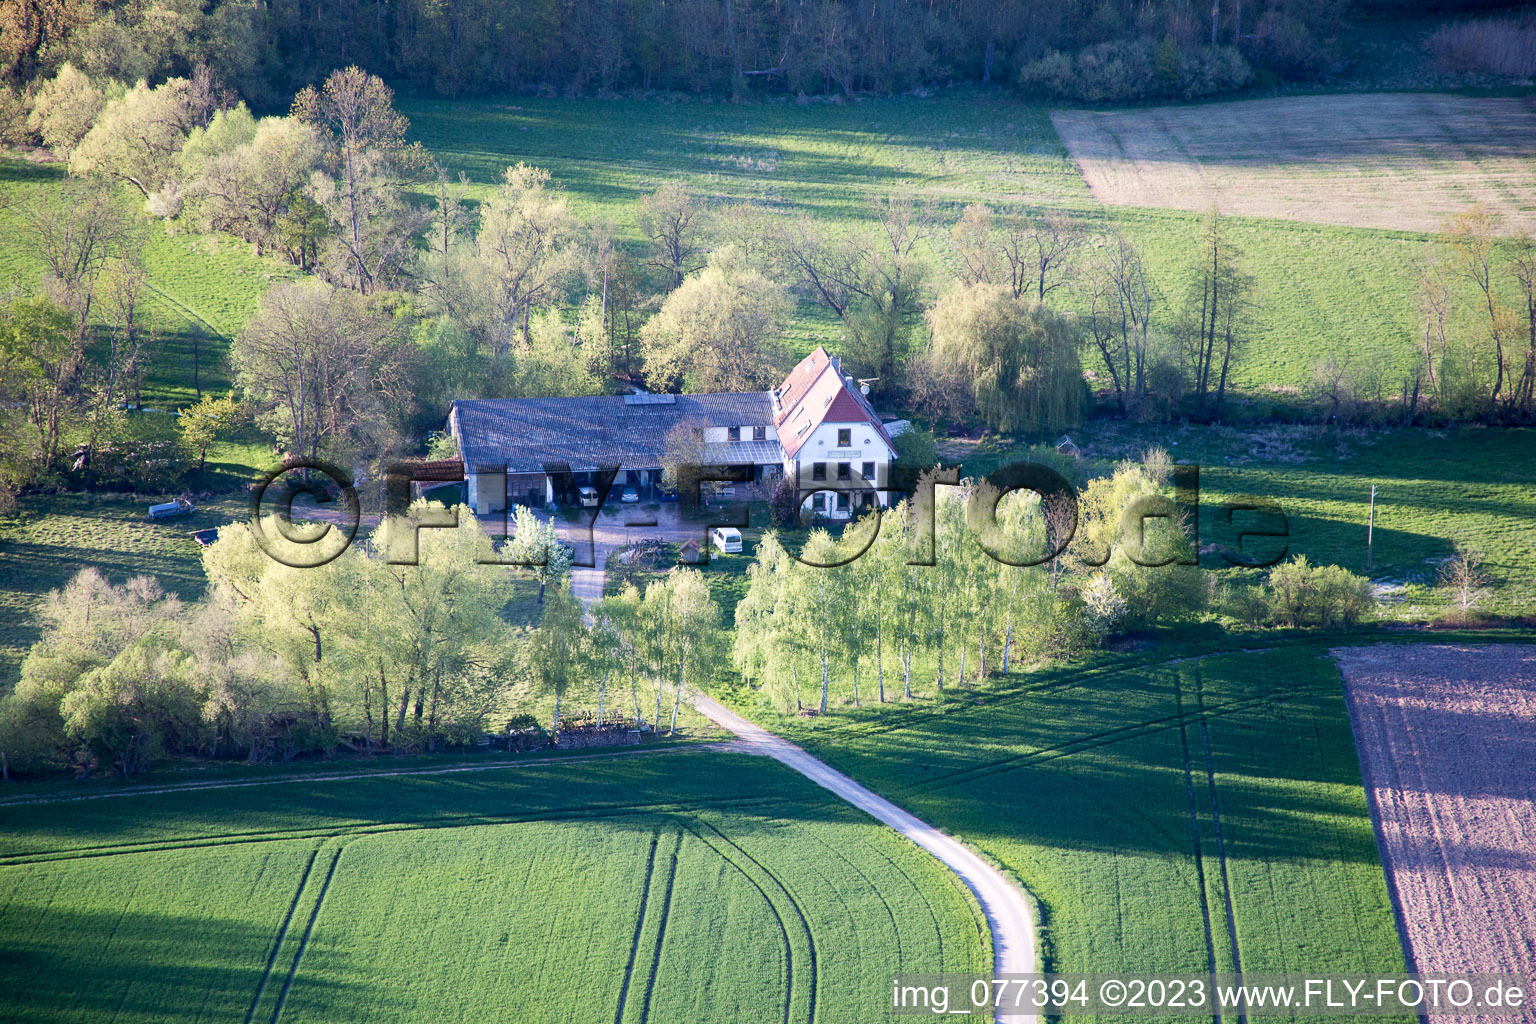 Steinweiler in the state Rhineland-Palatinate, Germany seen from above